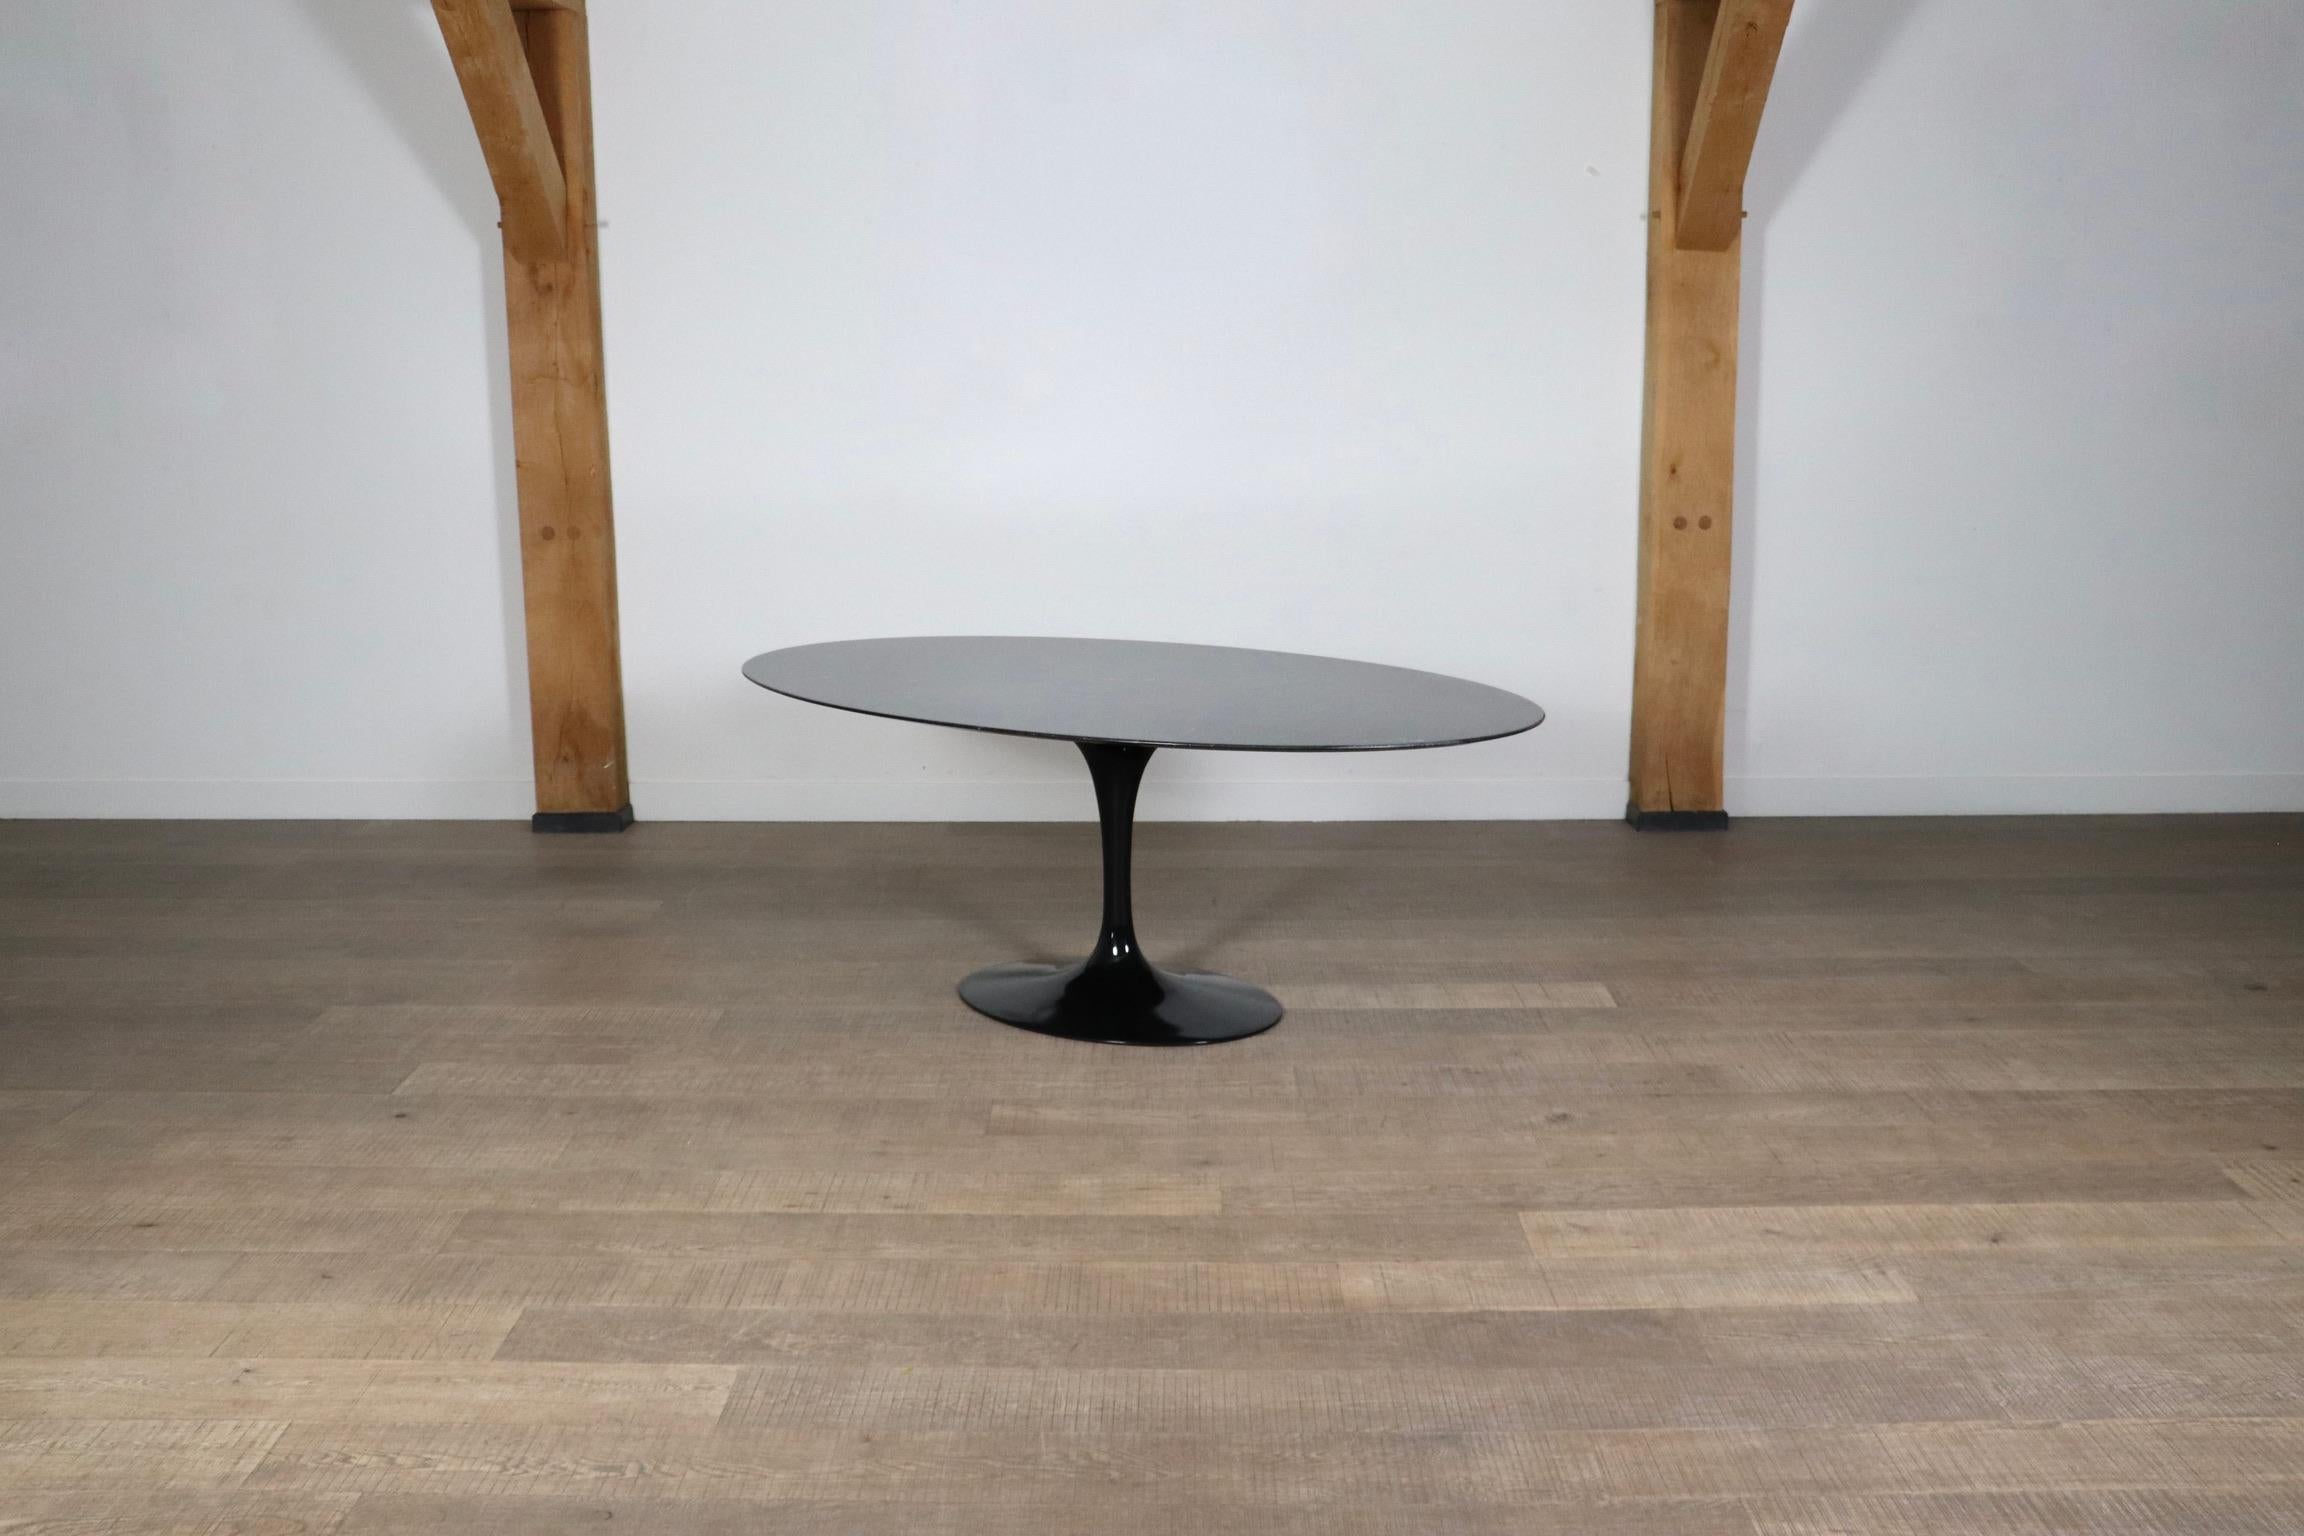 Metal Vintage Black Marble Tulip Oval Dining Table By Eero Saarinen For Knoll, 1970s For Sale